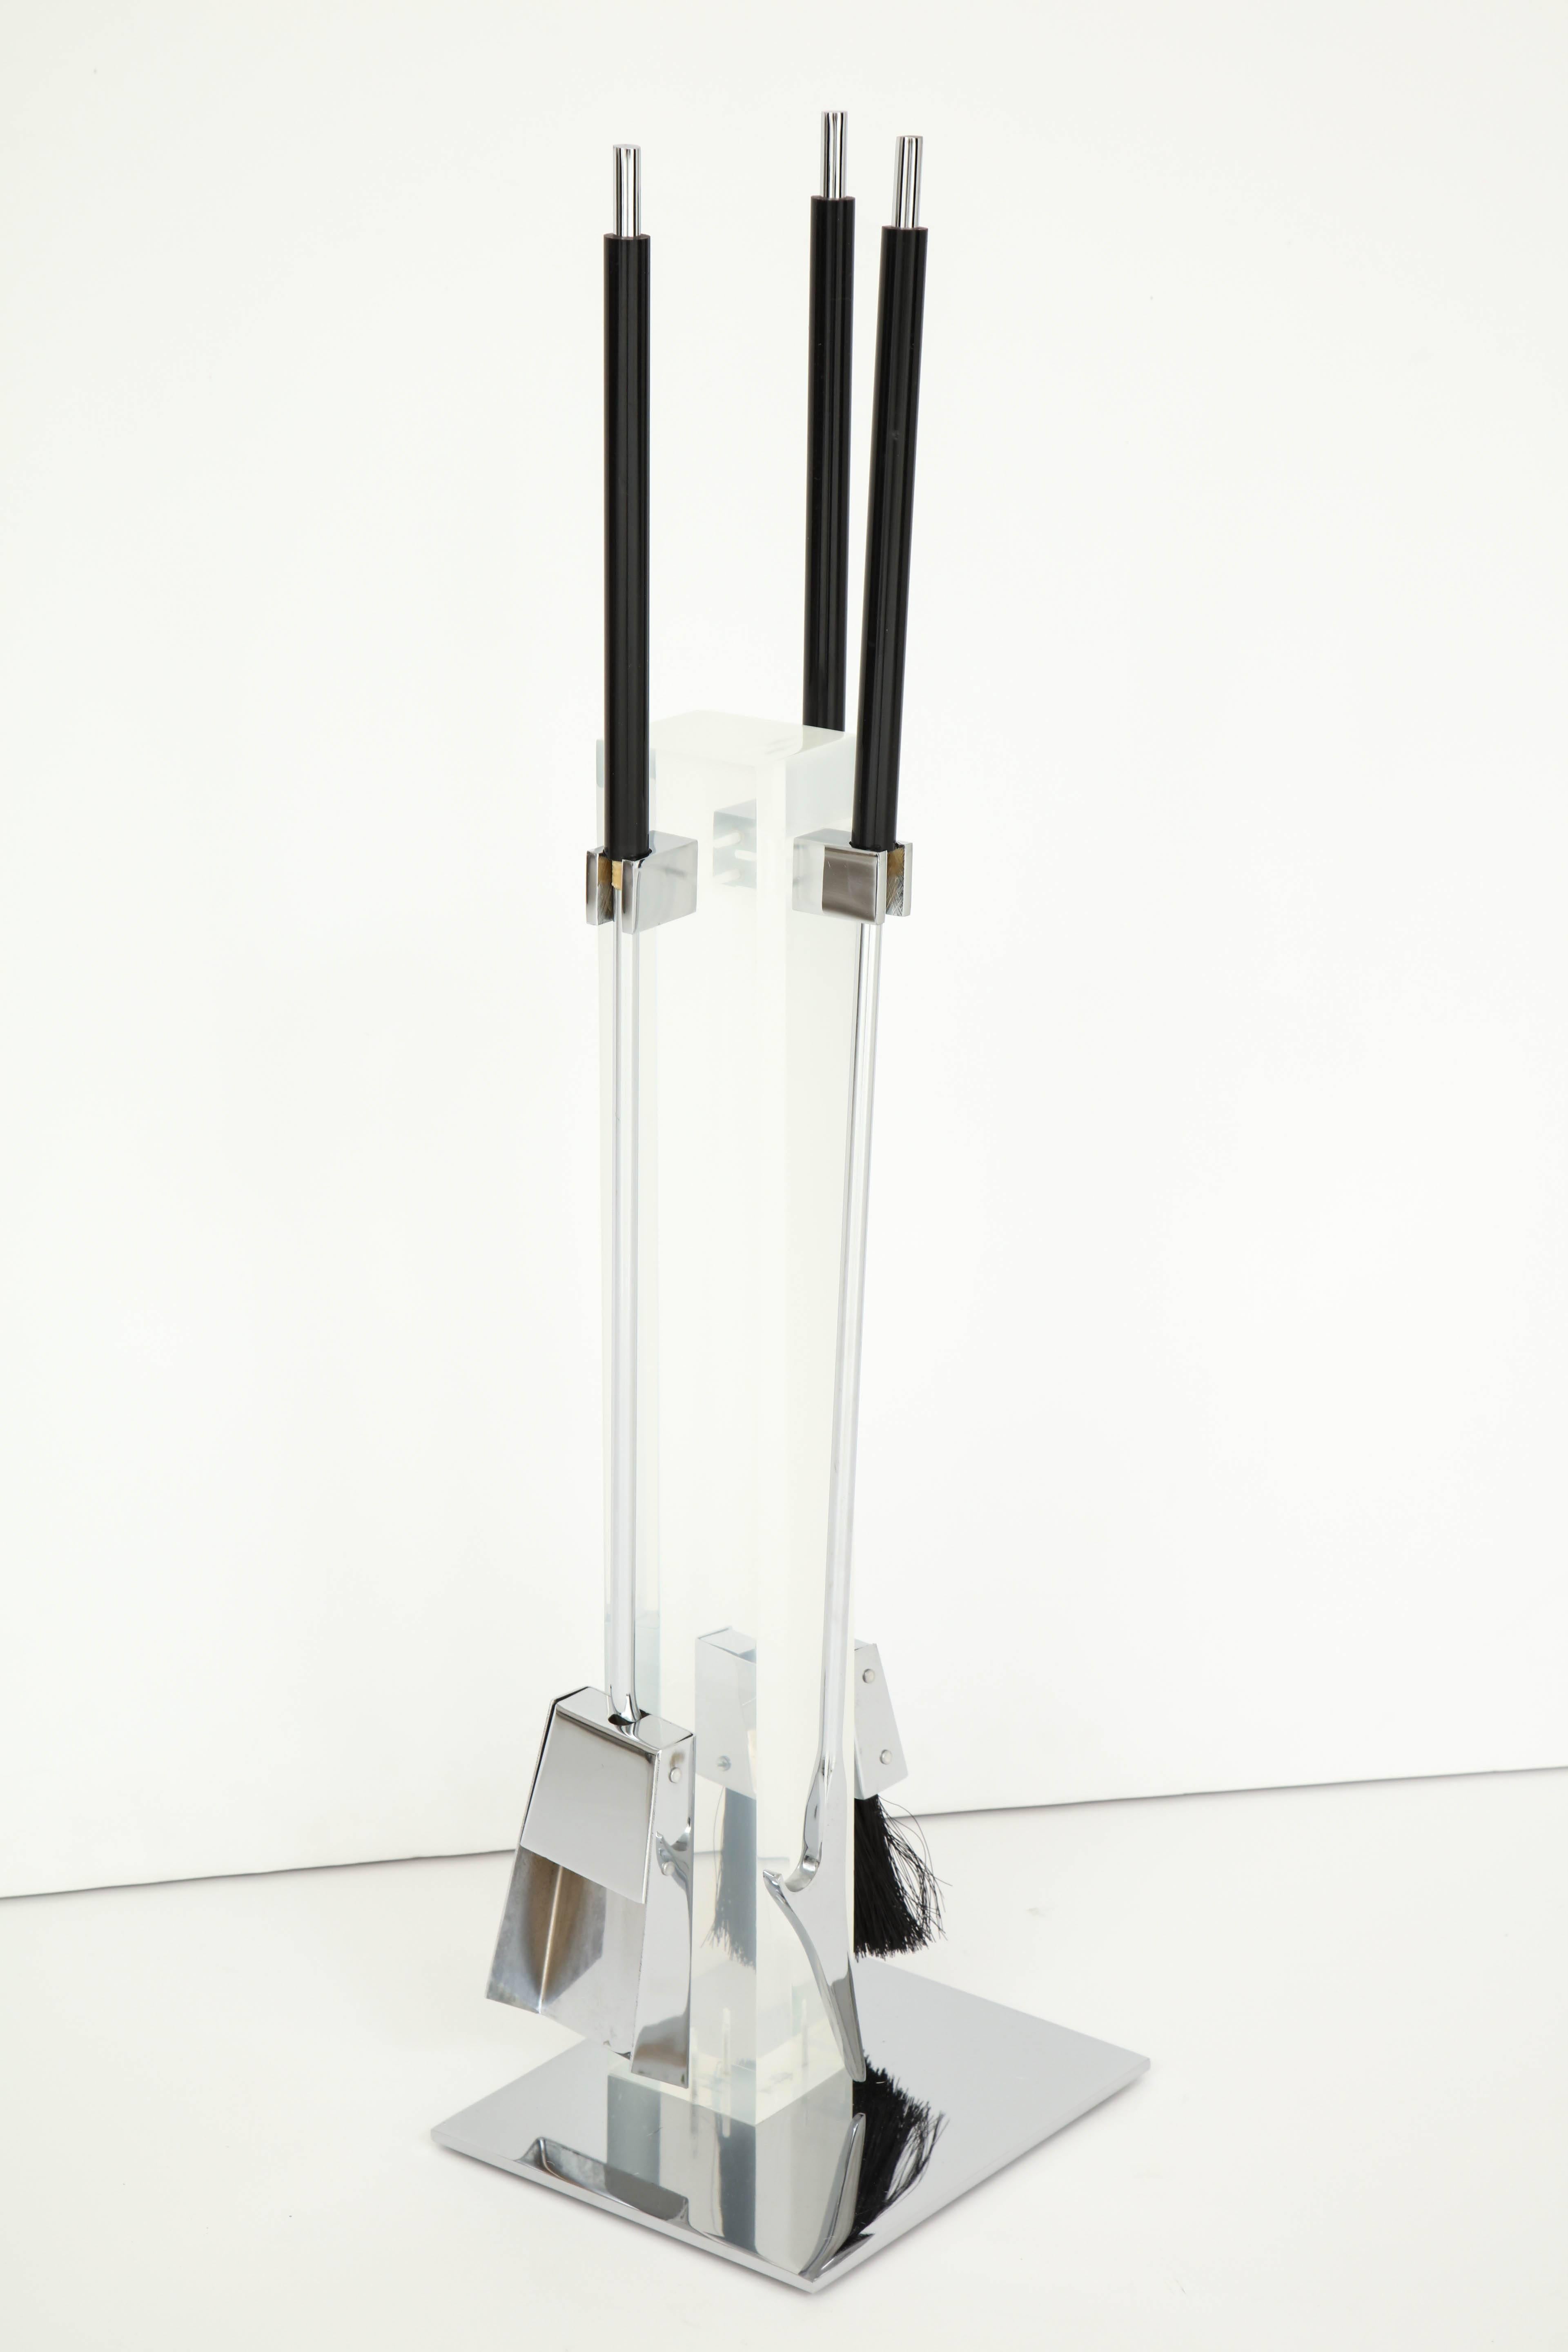 Italian Fire Place Tools, Midcentury, Lucite and Polished Chrome, C 1960, Italy For Sale